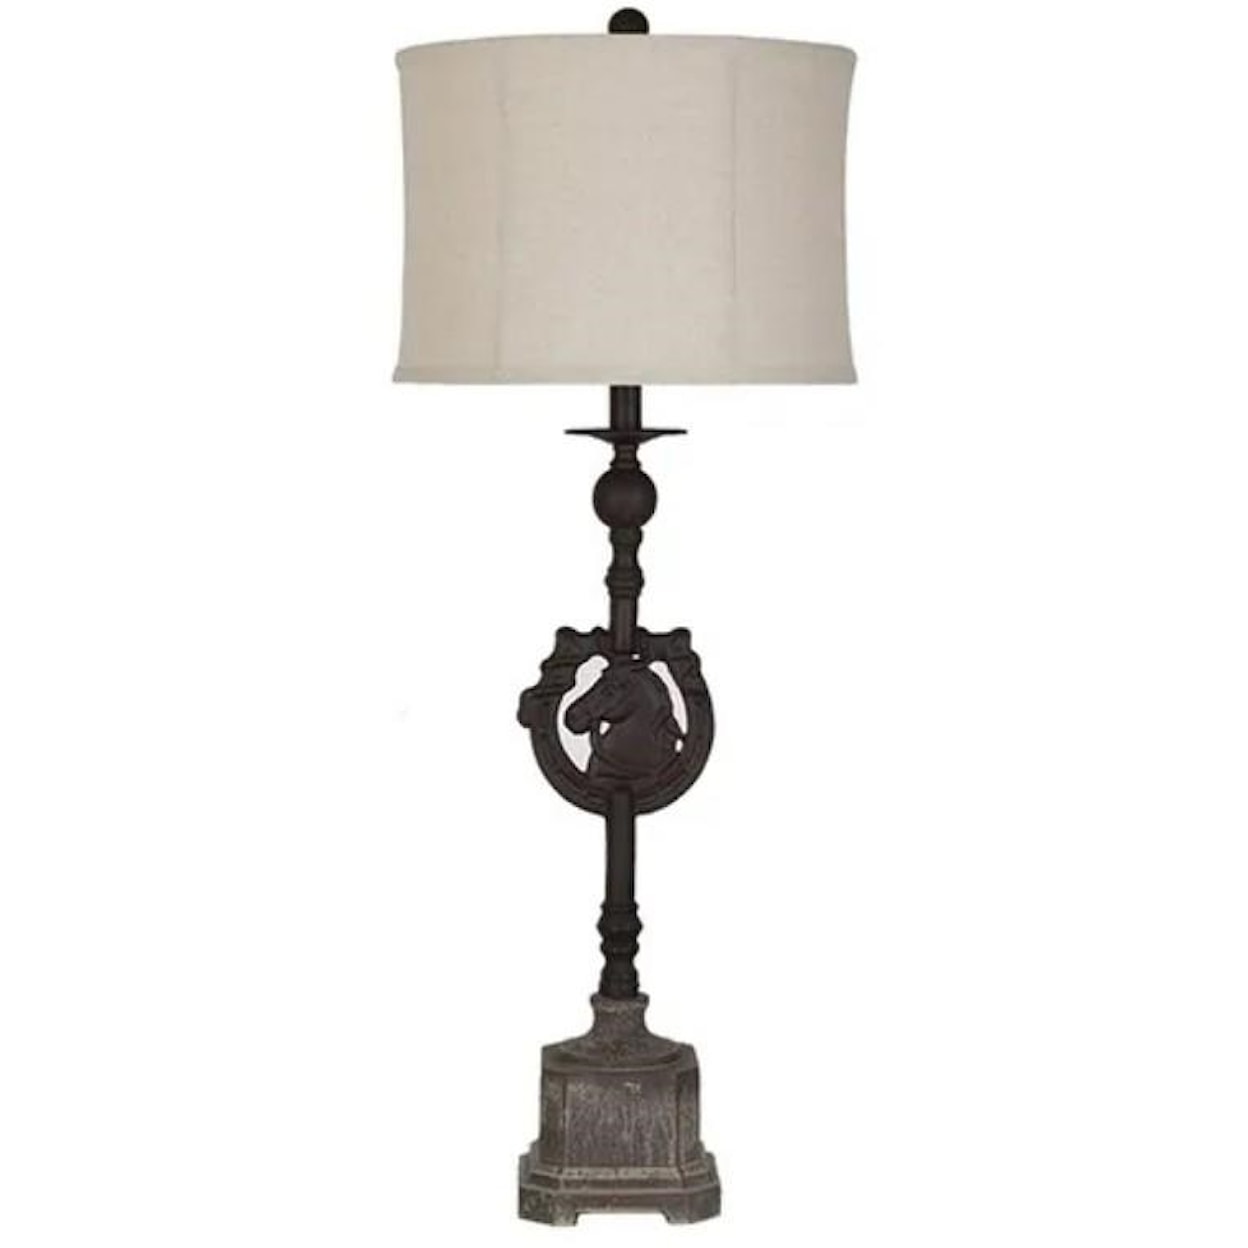 Crestview Collection Lighting Horse Stable Table Lamp